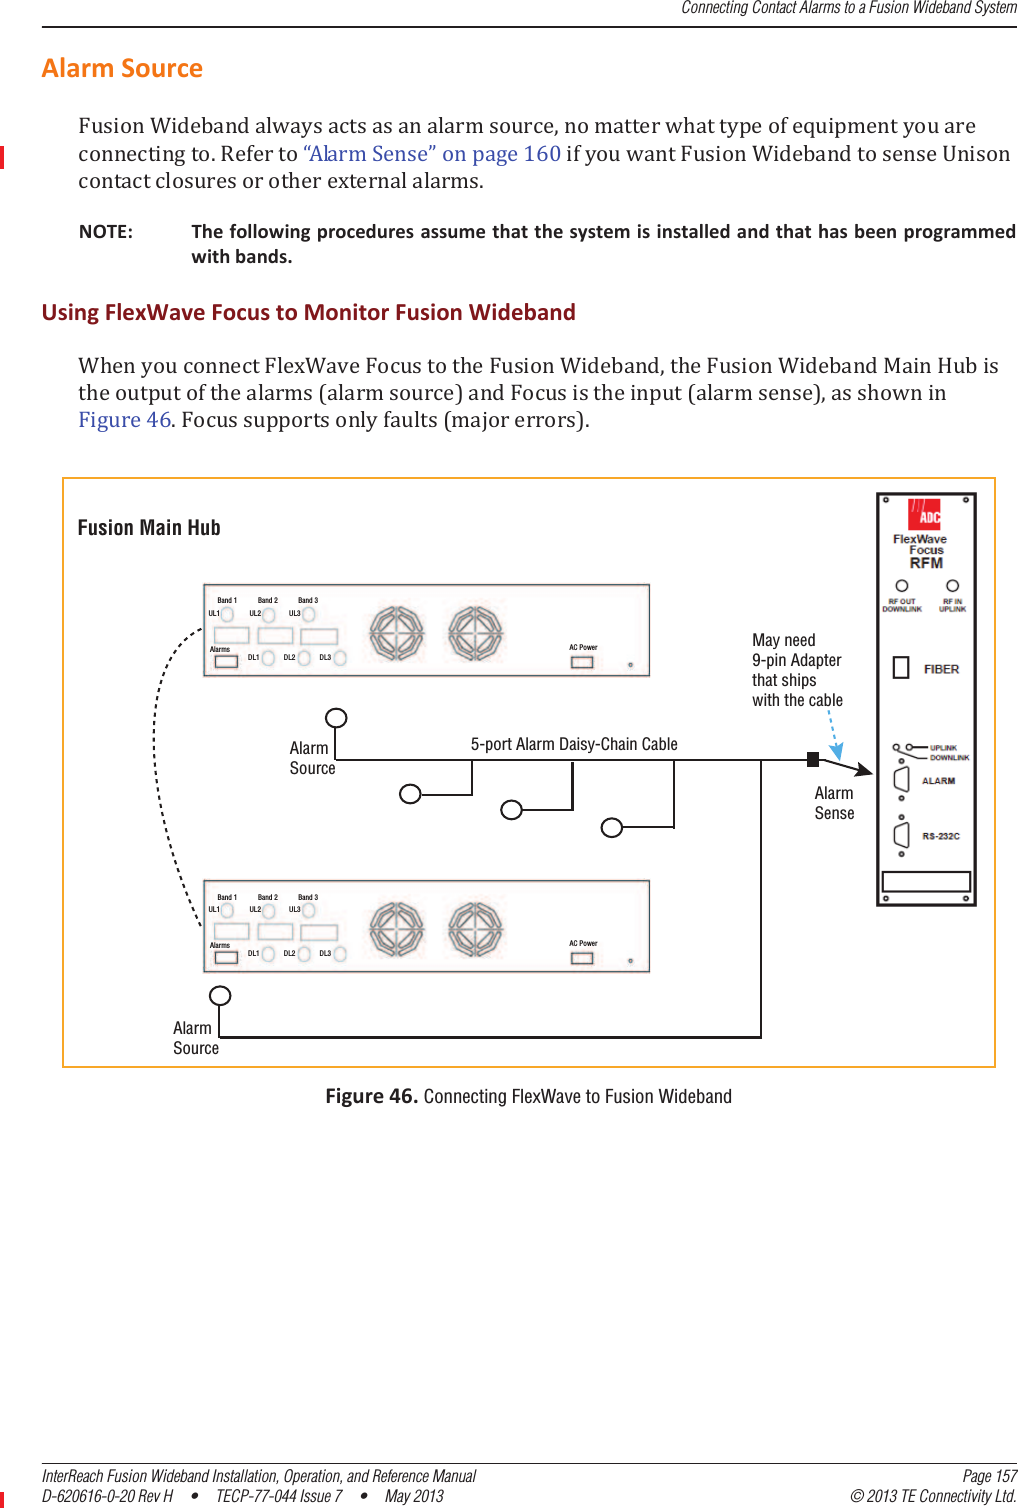 Connecting Contact Alarms to a Fusion Wideband SystemInterReach Fusion Wideband Installation, Operation, and Reference Manual Page 157D-620616-0-20 Rev H  •  TECP-77-044 Issue 7  •  May 2013 © 2013 TE Connectivity Ltd.AlarmSourceǡǤǲǳͳ͸ͲǤNOTE: Thefollowingproceduresassumethatthesystemisinstalledandthathasbeenprogrammedwithbands.UsingFlexWaveFocustoMonitorFusionWidebandǡȋȌȋȌǡͶ͸ǤȋȌǤFigure46.Connecting FlexWave to Fusion Wideband Band 1 Band 2 Band 3UL1 UL2 UL3AlarmsDL1 DL2 DL3AC PowerBand 1 Band 2 Band 3UL1 UL2 UL3AlarmsDL1 DL2 DL3AC PowerFusion Main HubMay need9-pin Adapterthat shipswith the cableAlarmSense5-port Alarm Daisy-Chain CableAlarmSourceAlarmSource